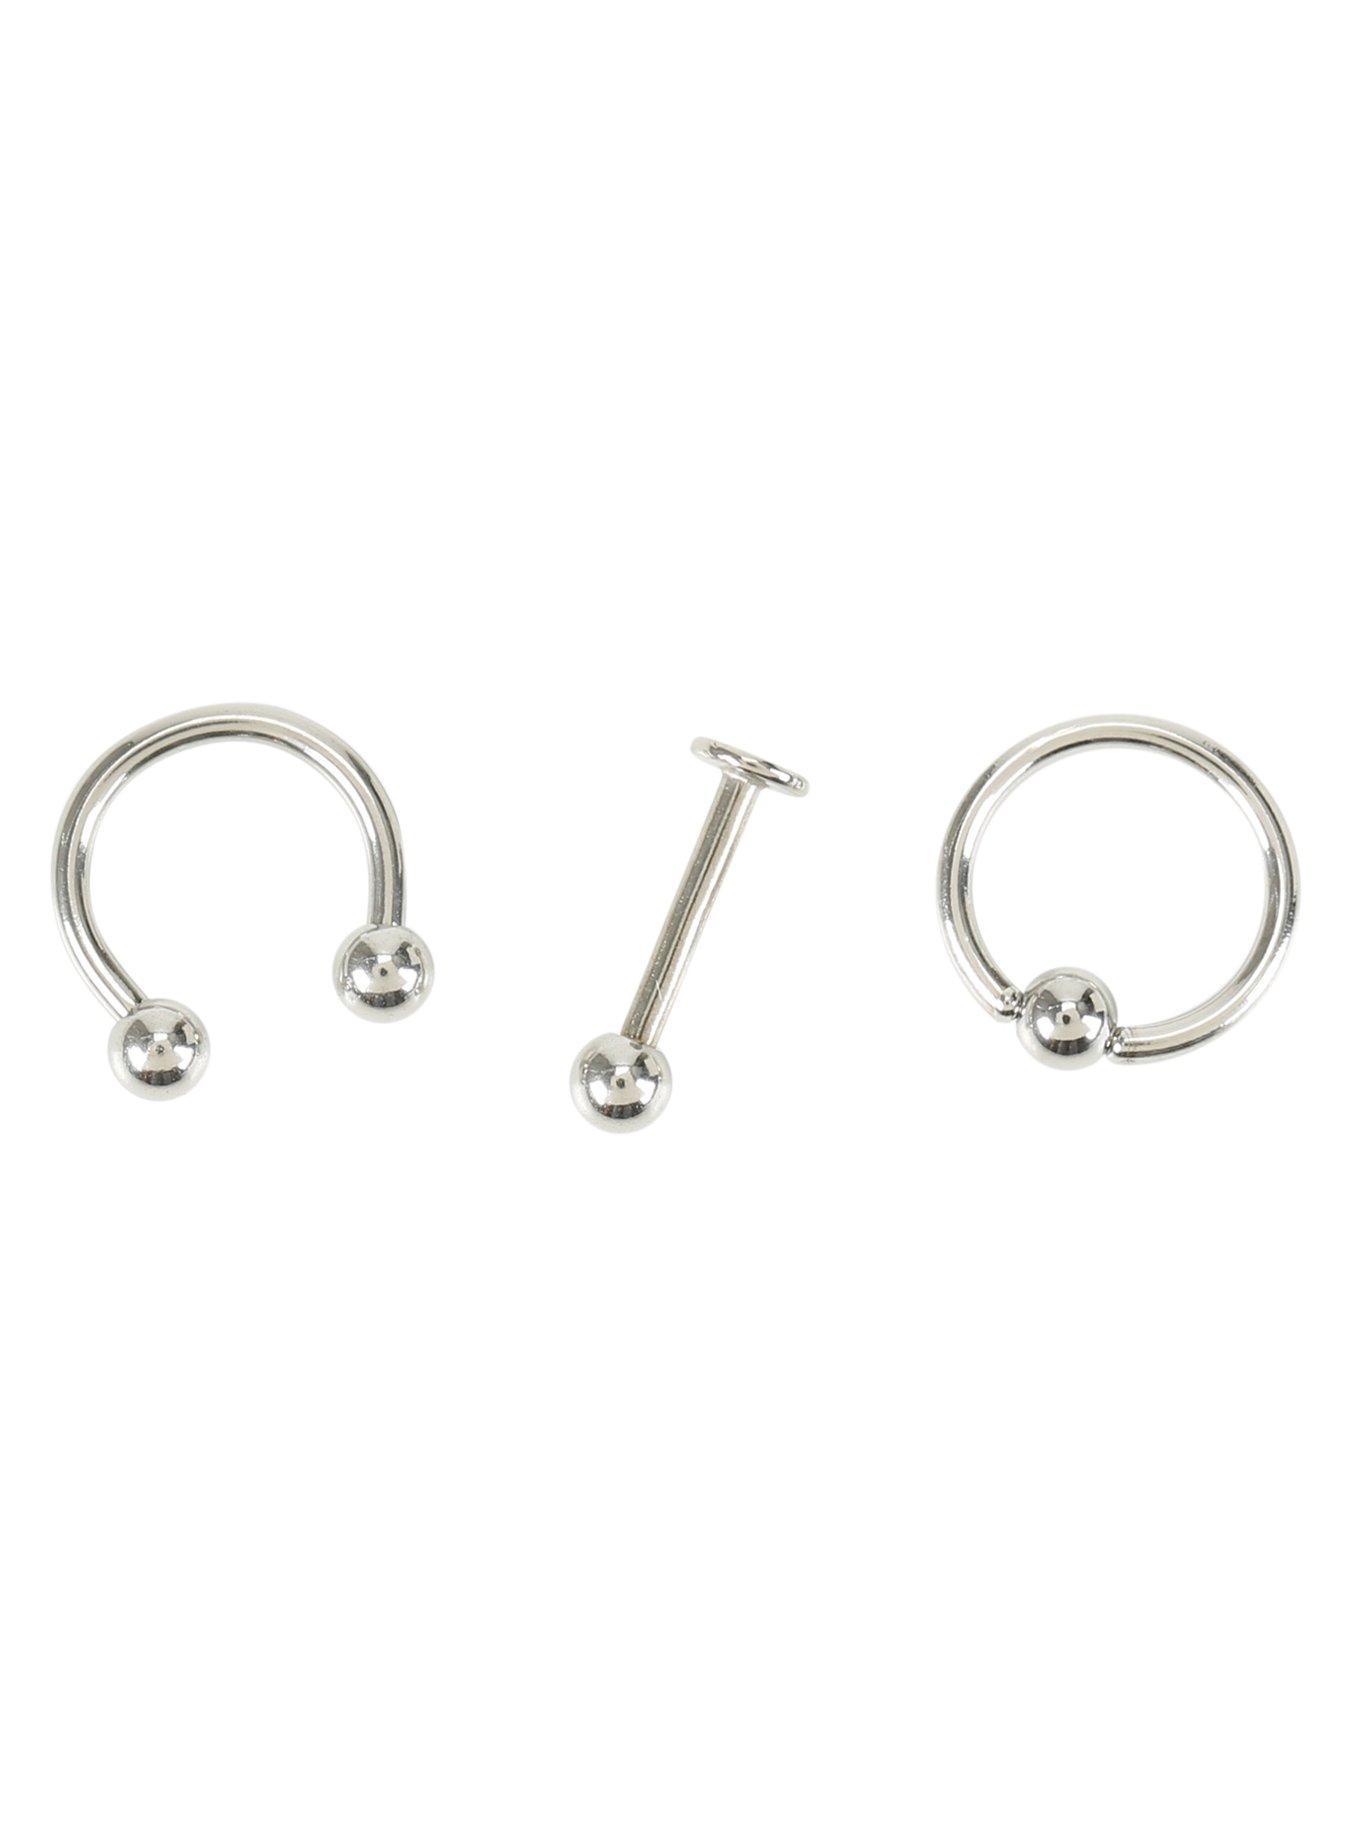 16G Steel Small Diameter Labret 3 Pack | Hot Topic